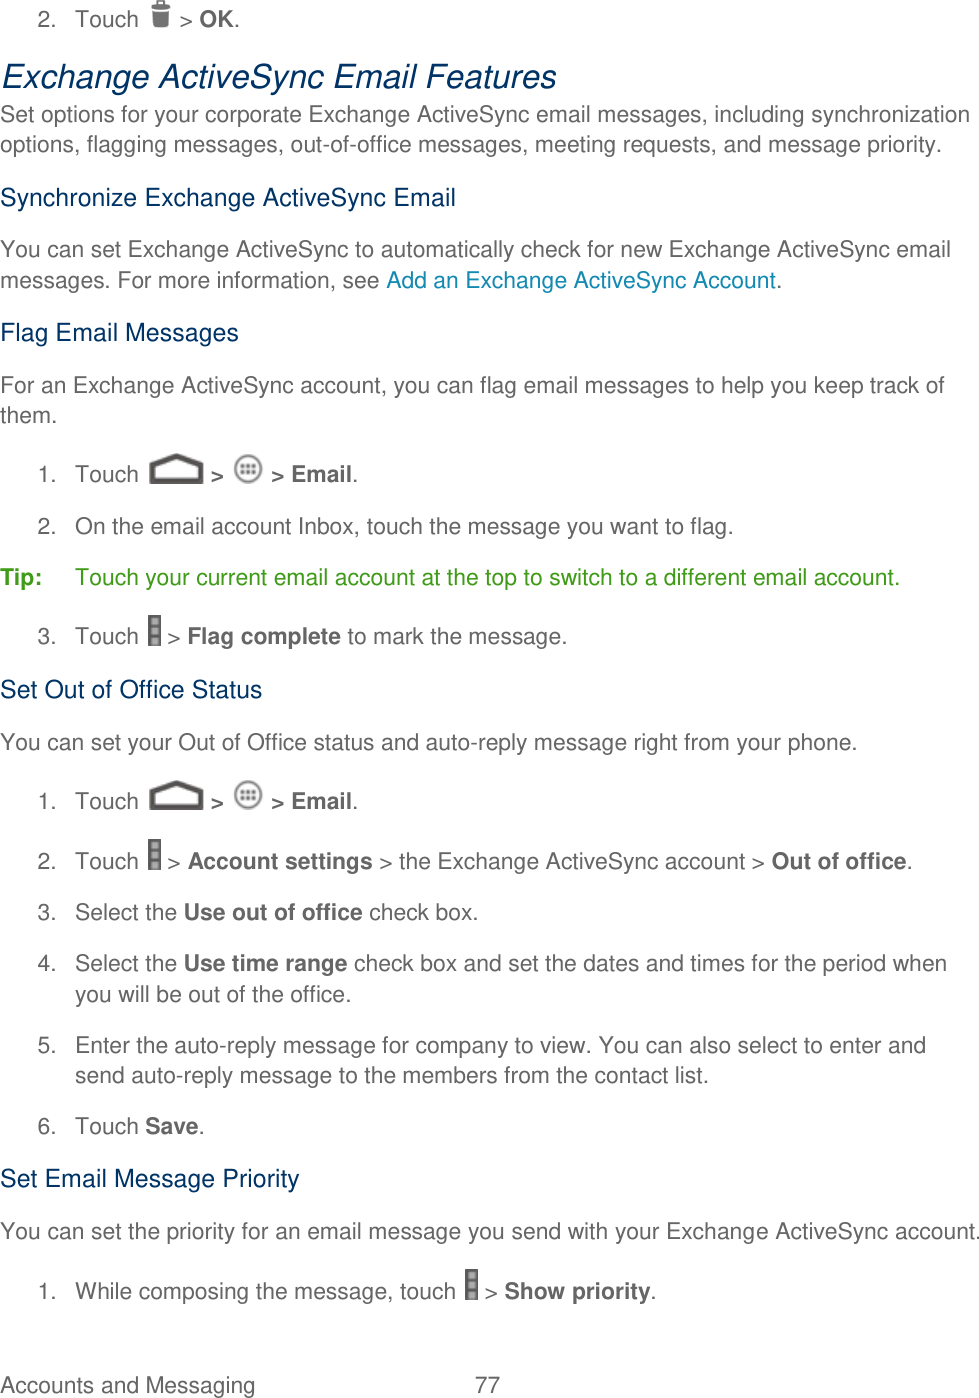 Accounts and Messaging  77   2.  Touch   &gt; OK. Exchange ActiveSync Email Features Set options for your corporate Exchange ActiveSync email messages, including synchronization options, flagging messages, out-of-office messages, meeting requests, and message priority. Synchronize Exchange ActiveSync Email You can set Exchange ActiveSync to automatically check for new Exchange ActiveSync email messages. For more information, see Add an Exchange ActiveSync Account. Flag Email Messages For an Exchange ActiveSync account, you can flag email messages to help you keep track of them. 1.  Touch   &gt;   &gt; Email. 2.  On the email account Inbox, touch the message you want to flag. Tip:  Touch your current email account at the top to switch to a different email account. 3.  Touch   &gt; Flag complete to mark the message. Set Out of Office Status You can set your Out of Office status and auto-reply message right from your phone. 1.  Touch   &gt;   &gt; Email. 2.  Touch   &gt; Account settings &gt; the Exchange ActiveSync account &gt; Out of office. 3.  Select the Use out of office check box. 4.  Select the Use time range check box and set the dates and times for the period when you will be out of the office. 5.  Enter the auto-reply message for company to view. You can also select to enter and send auto-reply message to the members from the contact list. 6.  Touch Save. Set Email Message Priority You can set the priority for an email message you send with your Exchange ActiveSync account. 1.  While composing the message, touch   &gt; Show priority. 